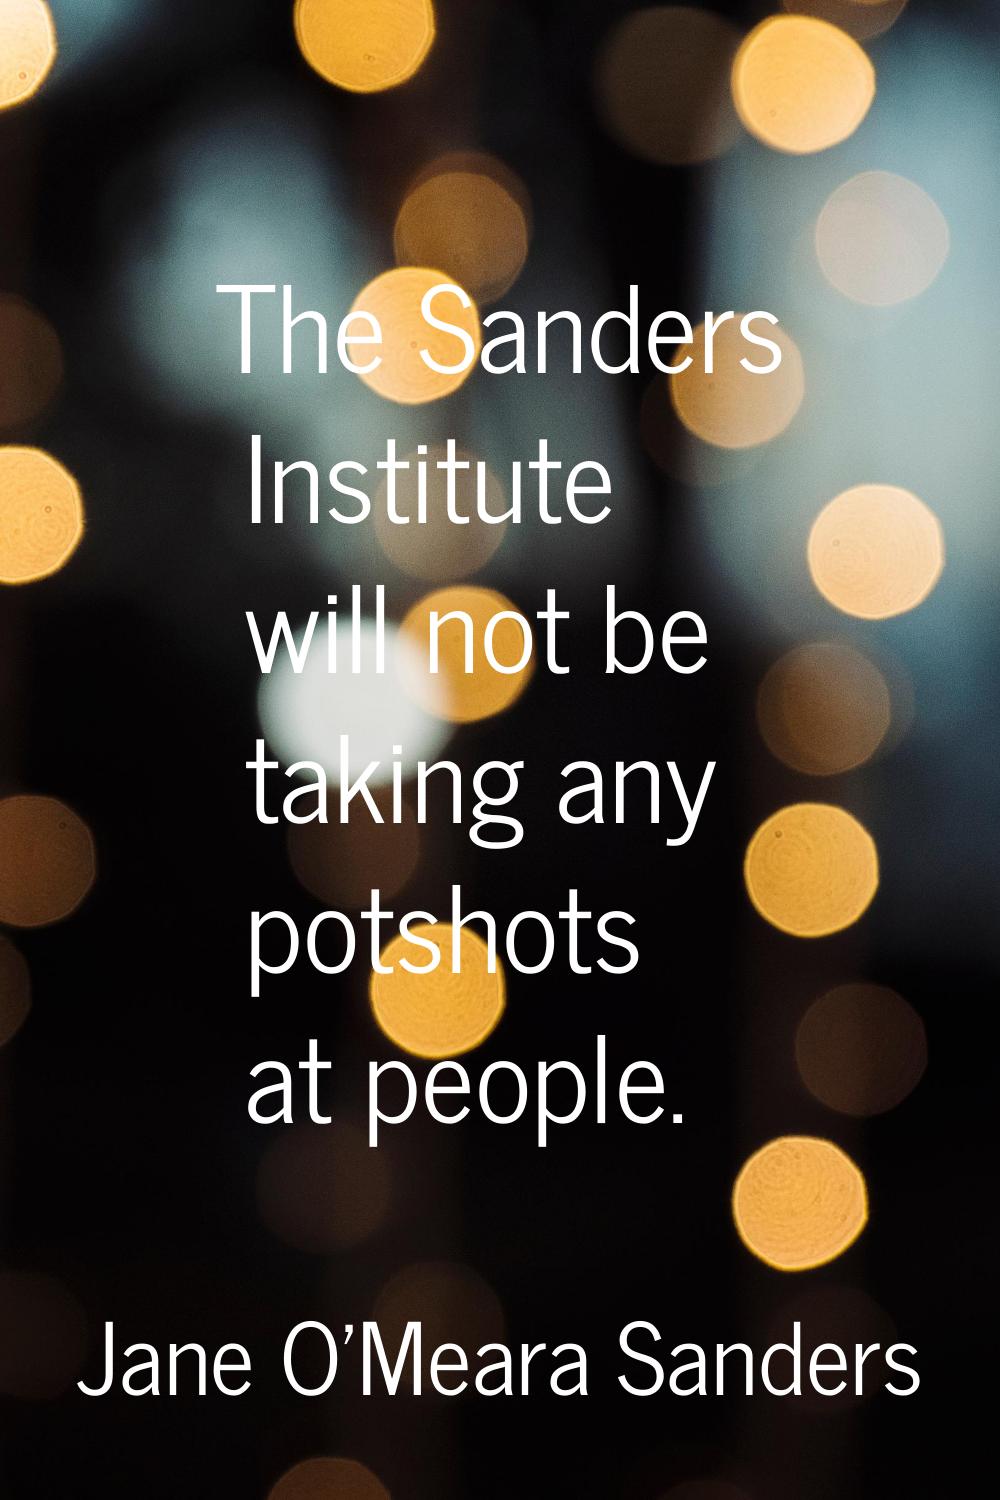 The Sanders Institute will not be taking any potshots at people.